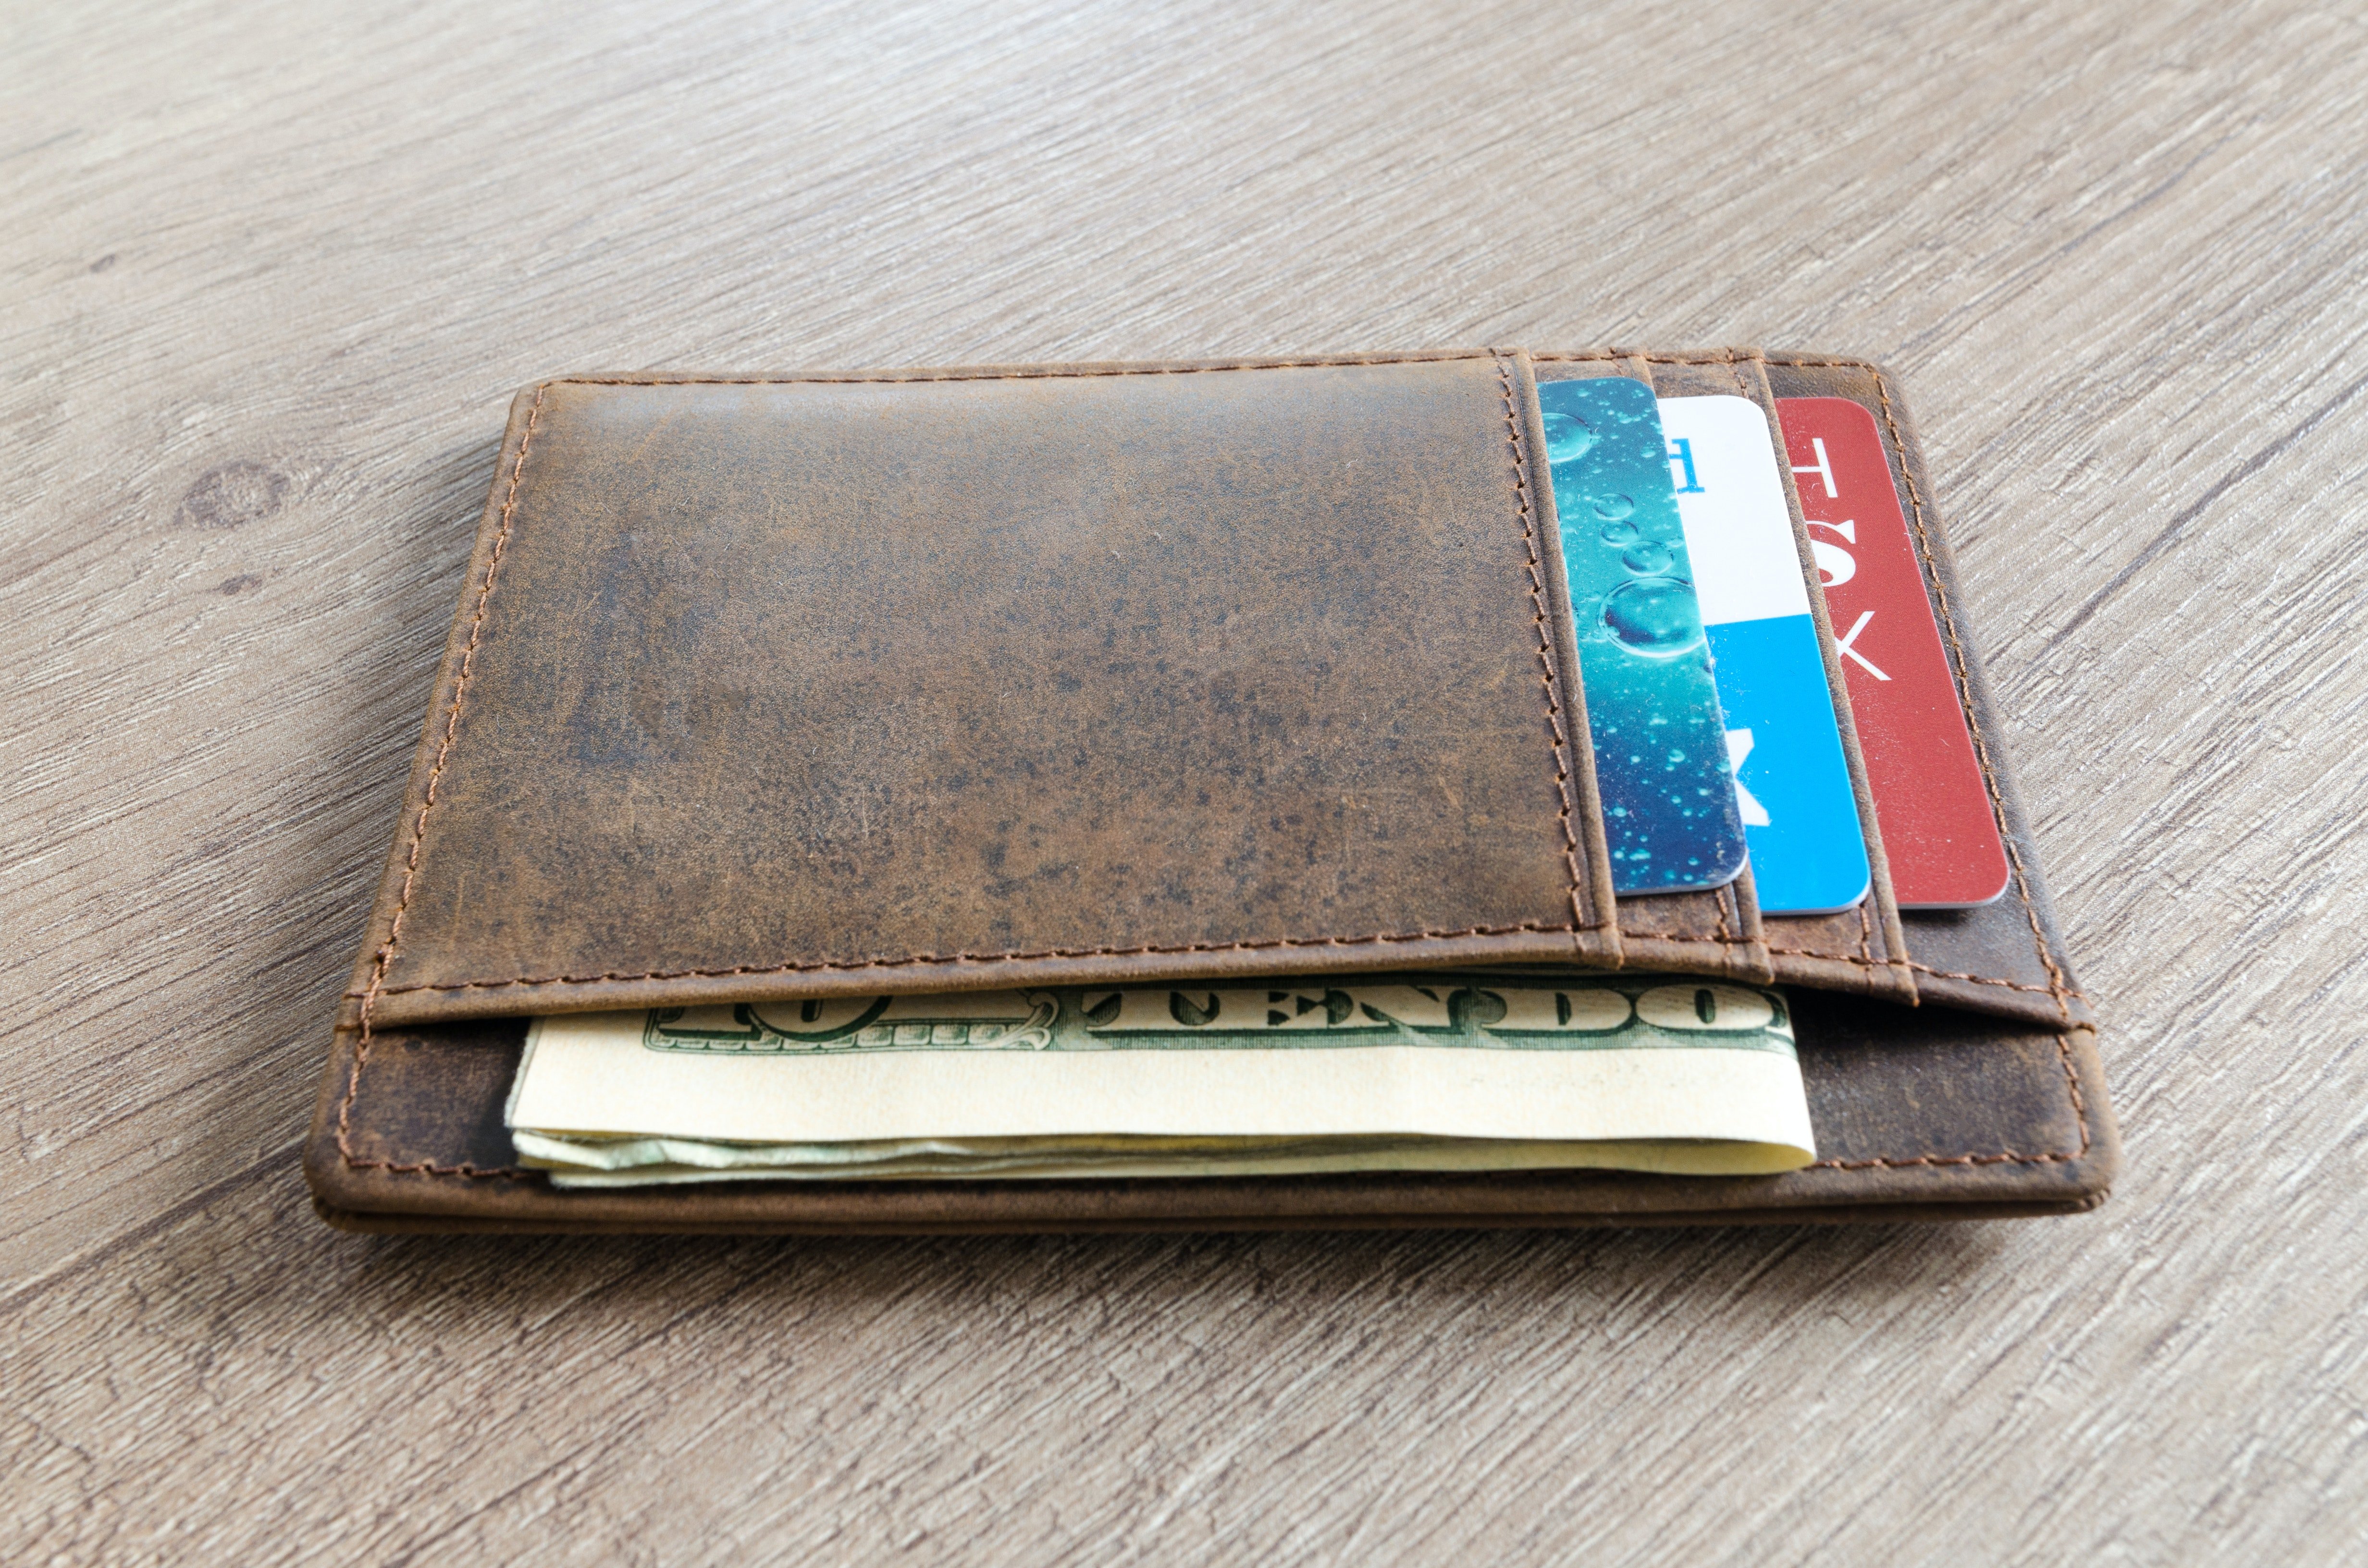 The wallet contained several $100 bills that called to Elizabeth | Source: Pexels